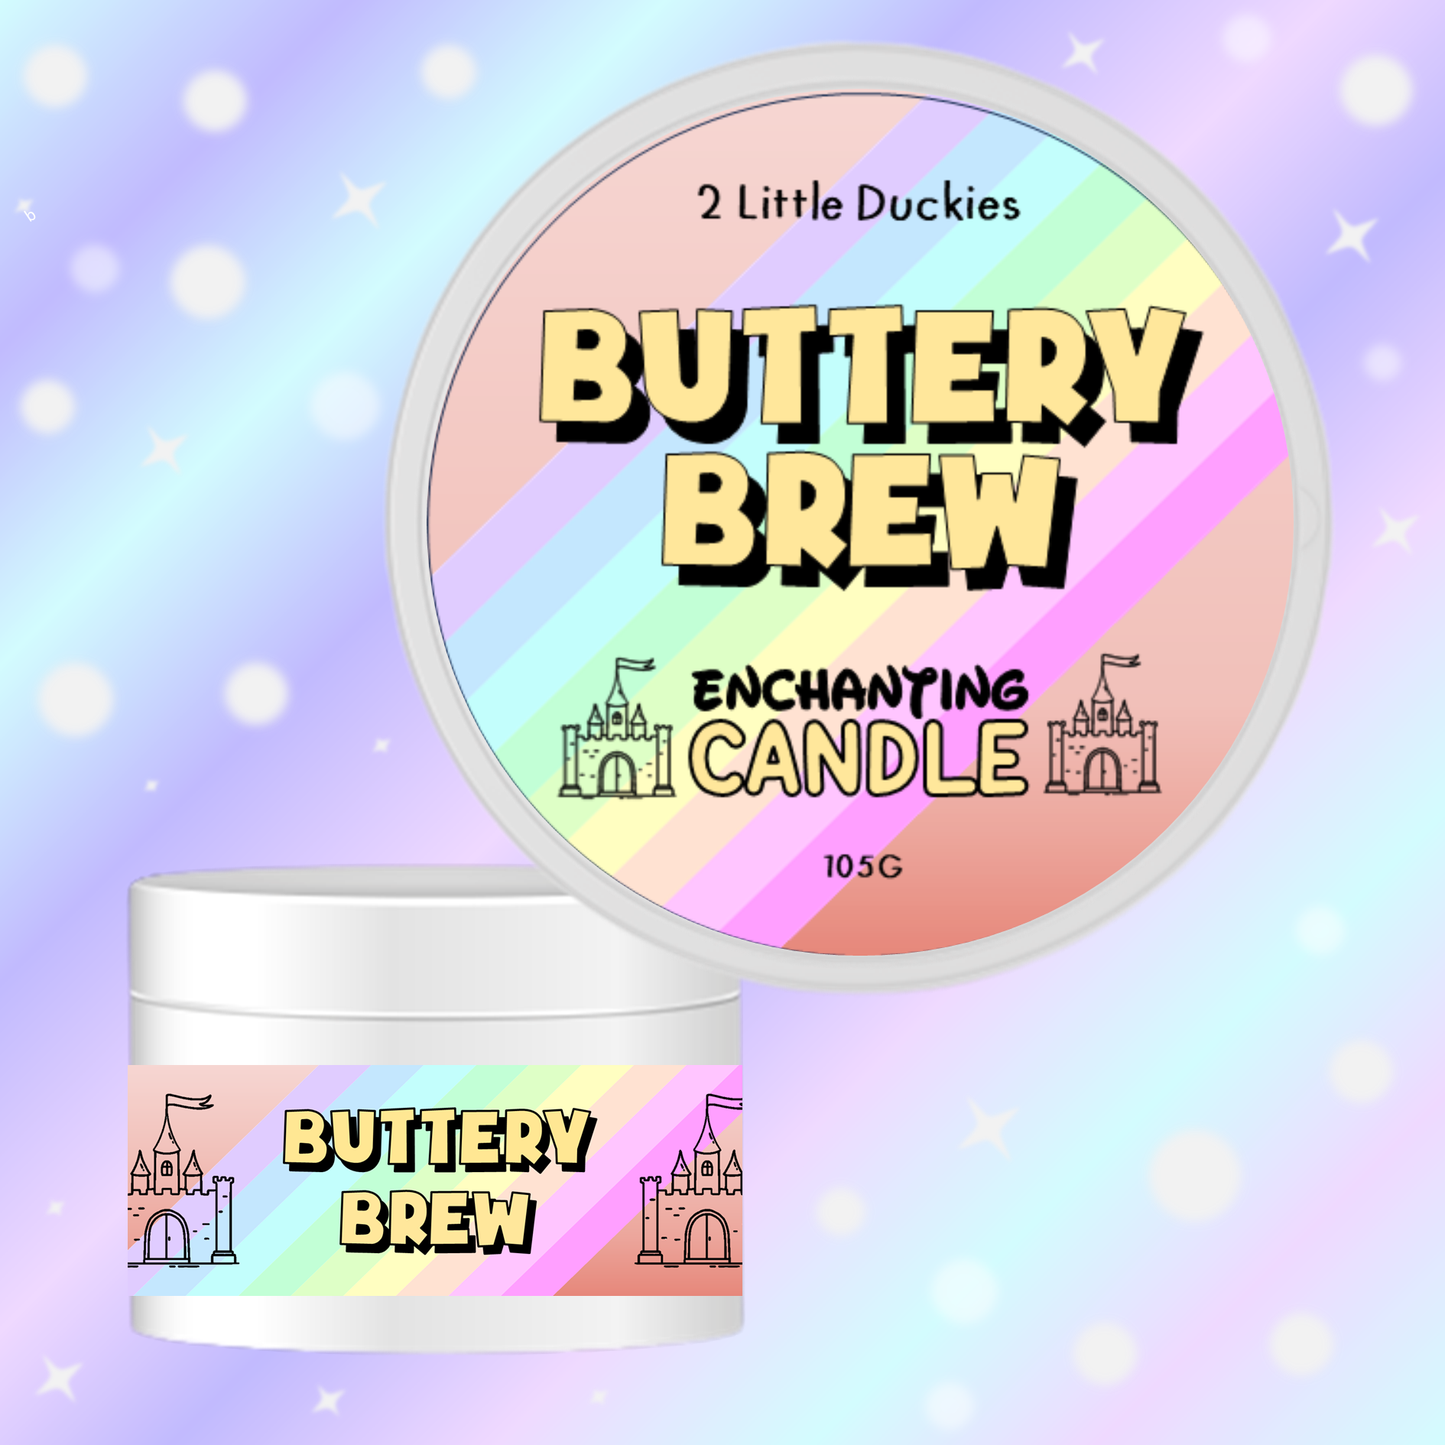 Buttery Brew Candle